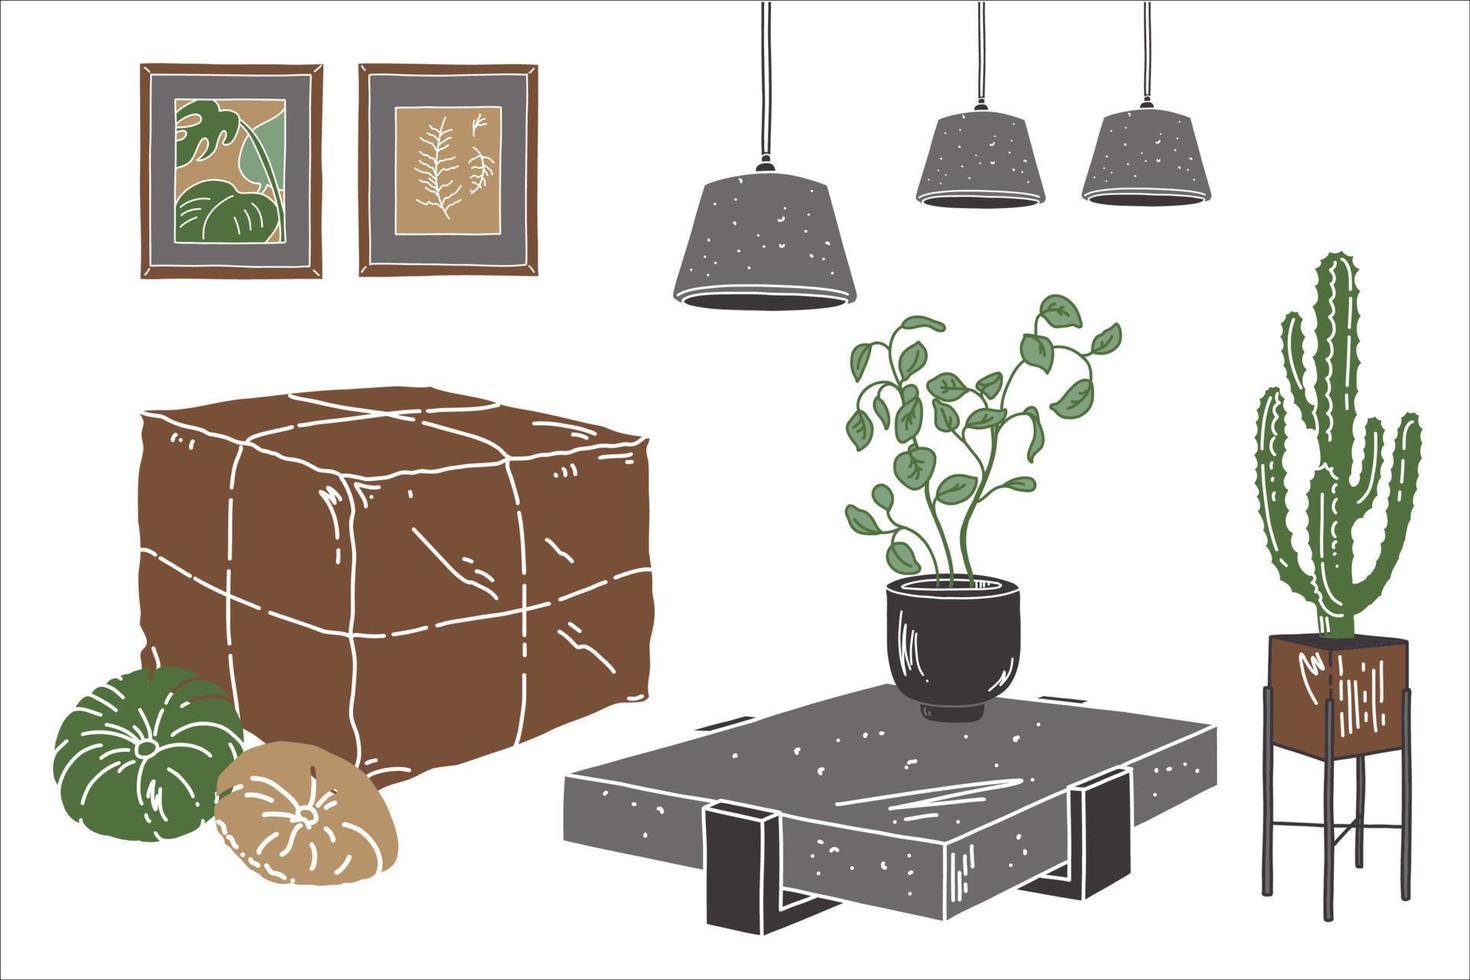 Sketch living apartment. Loft style furniture in living room. Flat vector illustration with brown pouf, lamp, pillow, table and home plants.